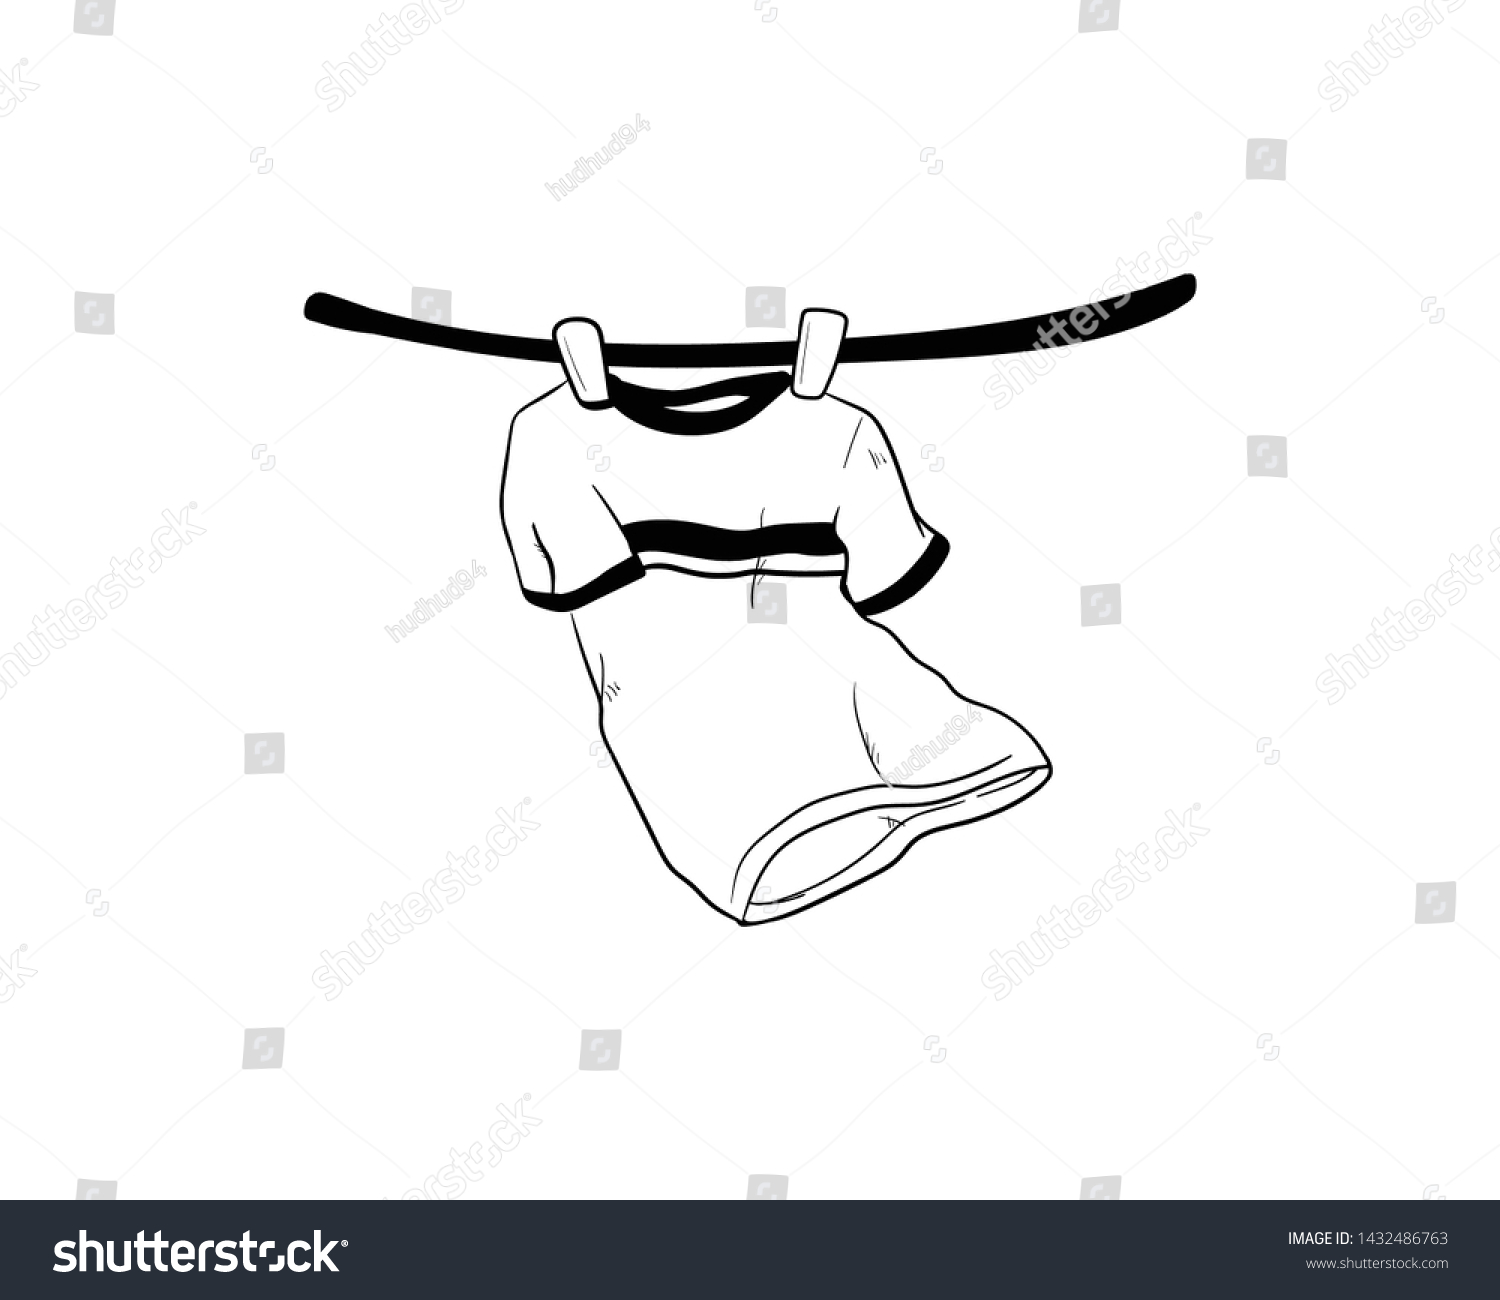 Clothesline Doodle Hand Drawing Vector Stock Vector (Royalty Free ...